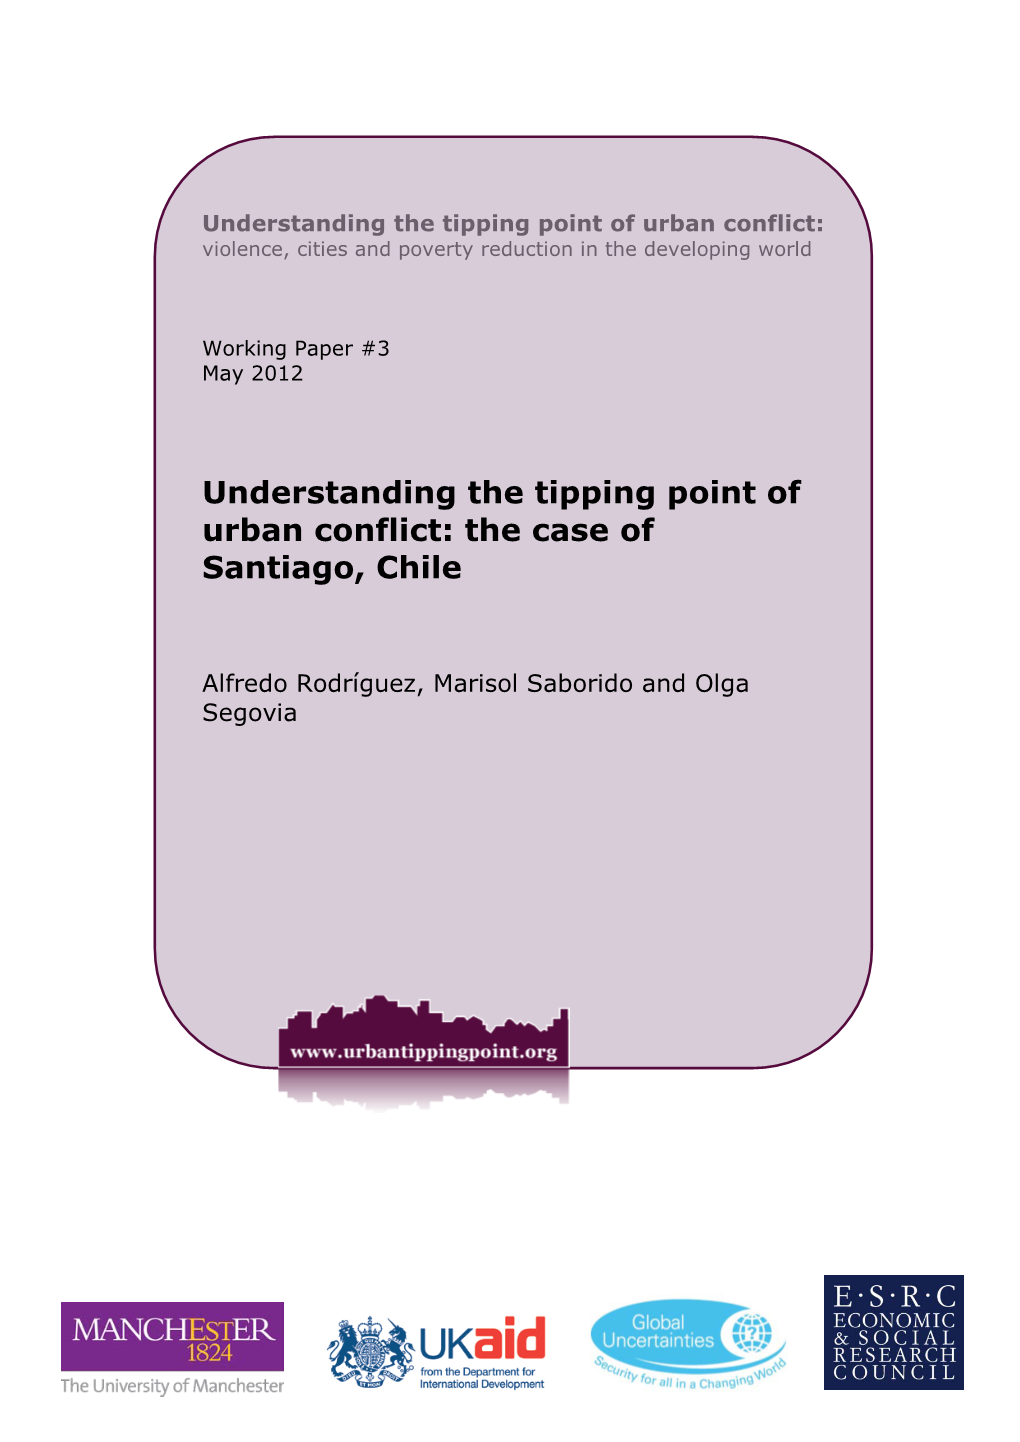 Understanding the Tipping Point of Urban Conflict: the Case of Santiago, Chile